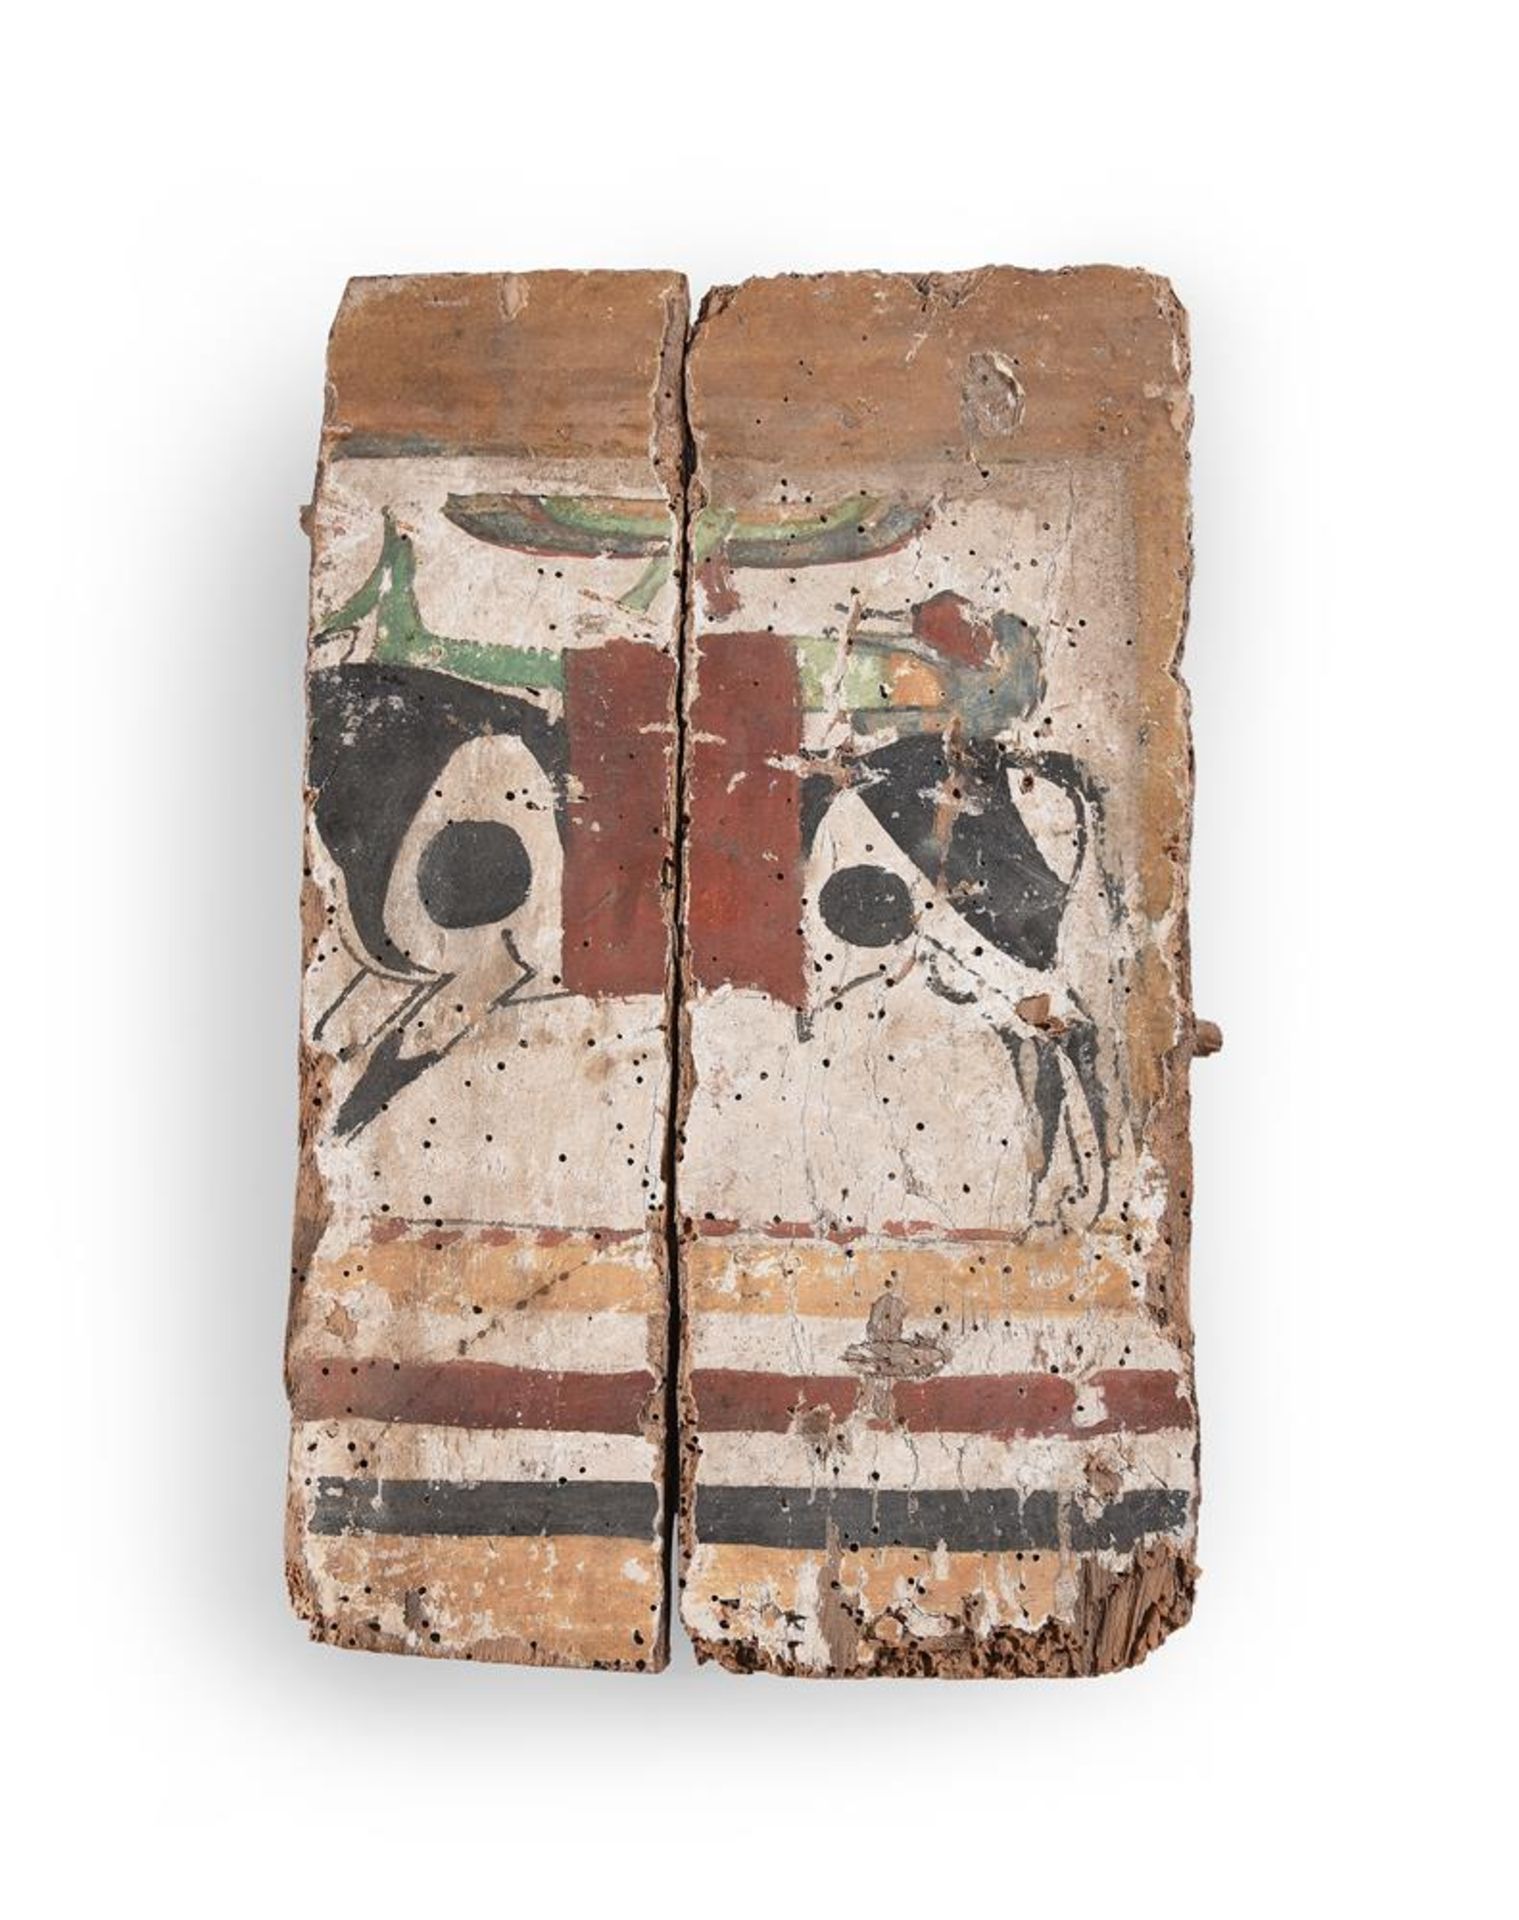 AN EGYPTIAN POLYCHROME PAINTED COFFIN FOOT PANEL, LATE PERIOD, AFTER 664 B.C.